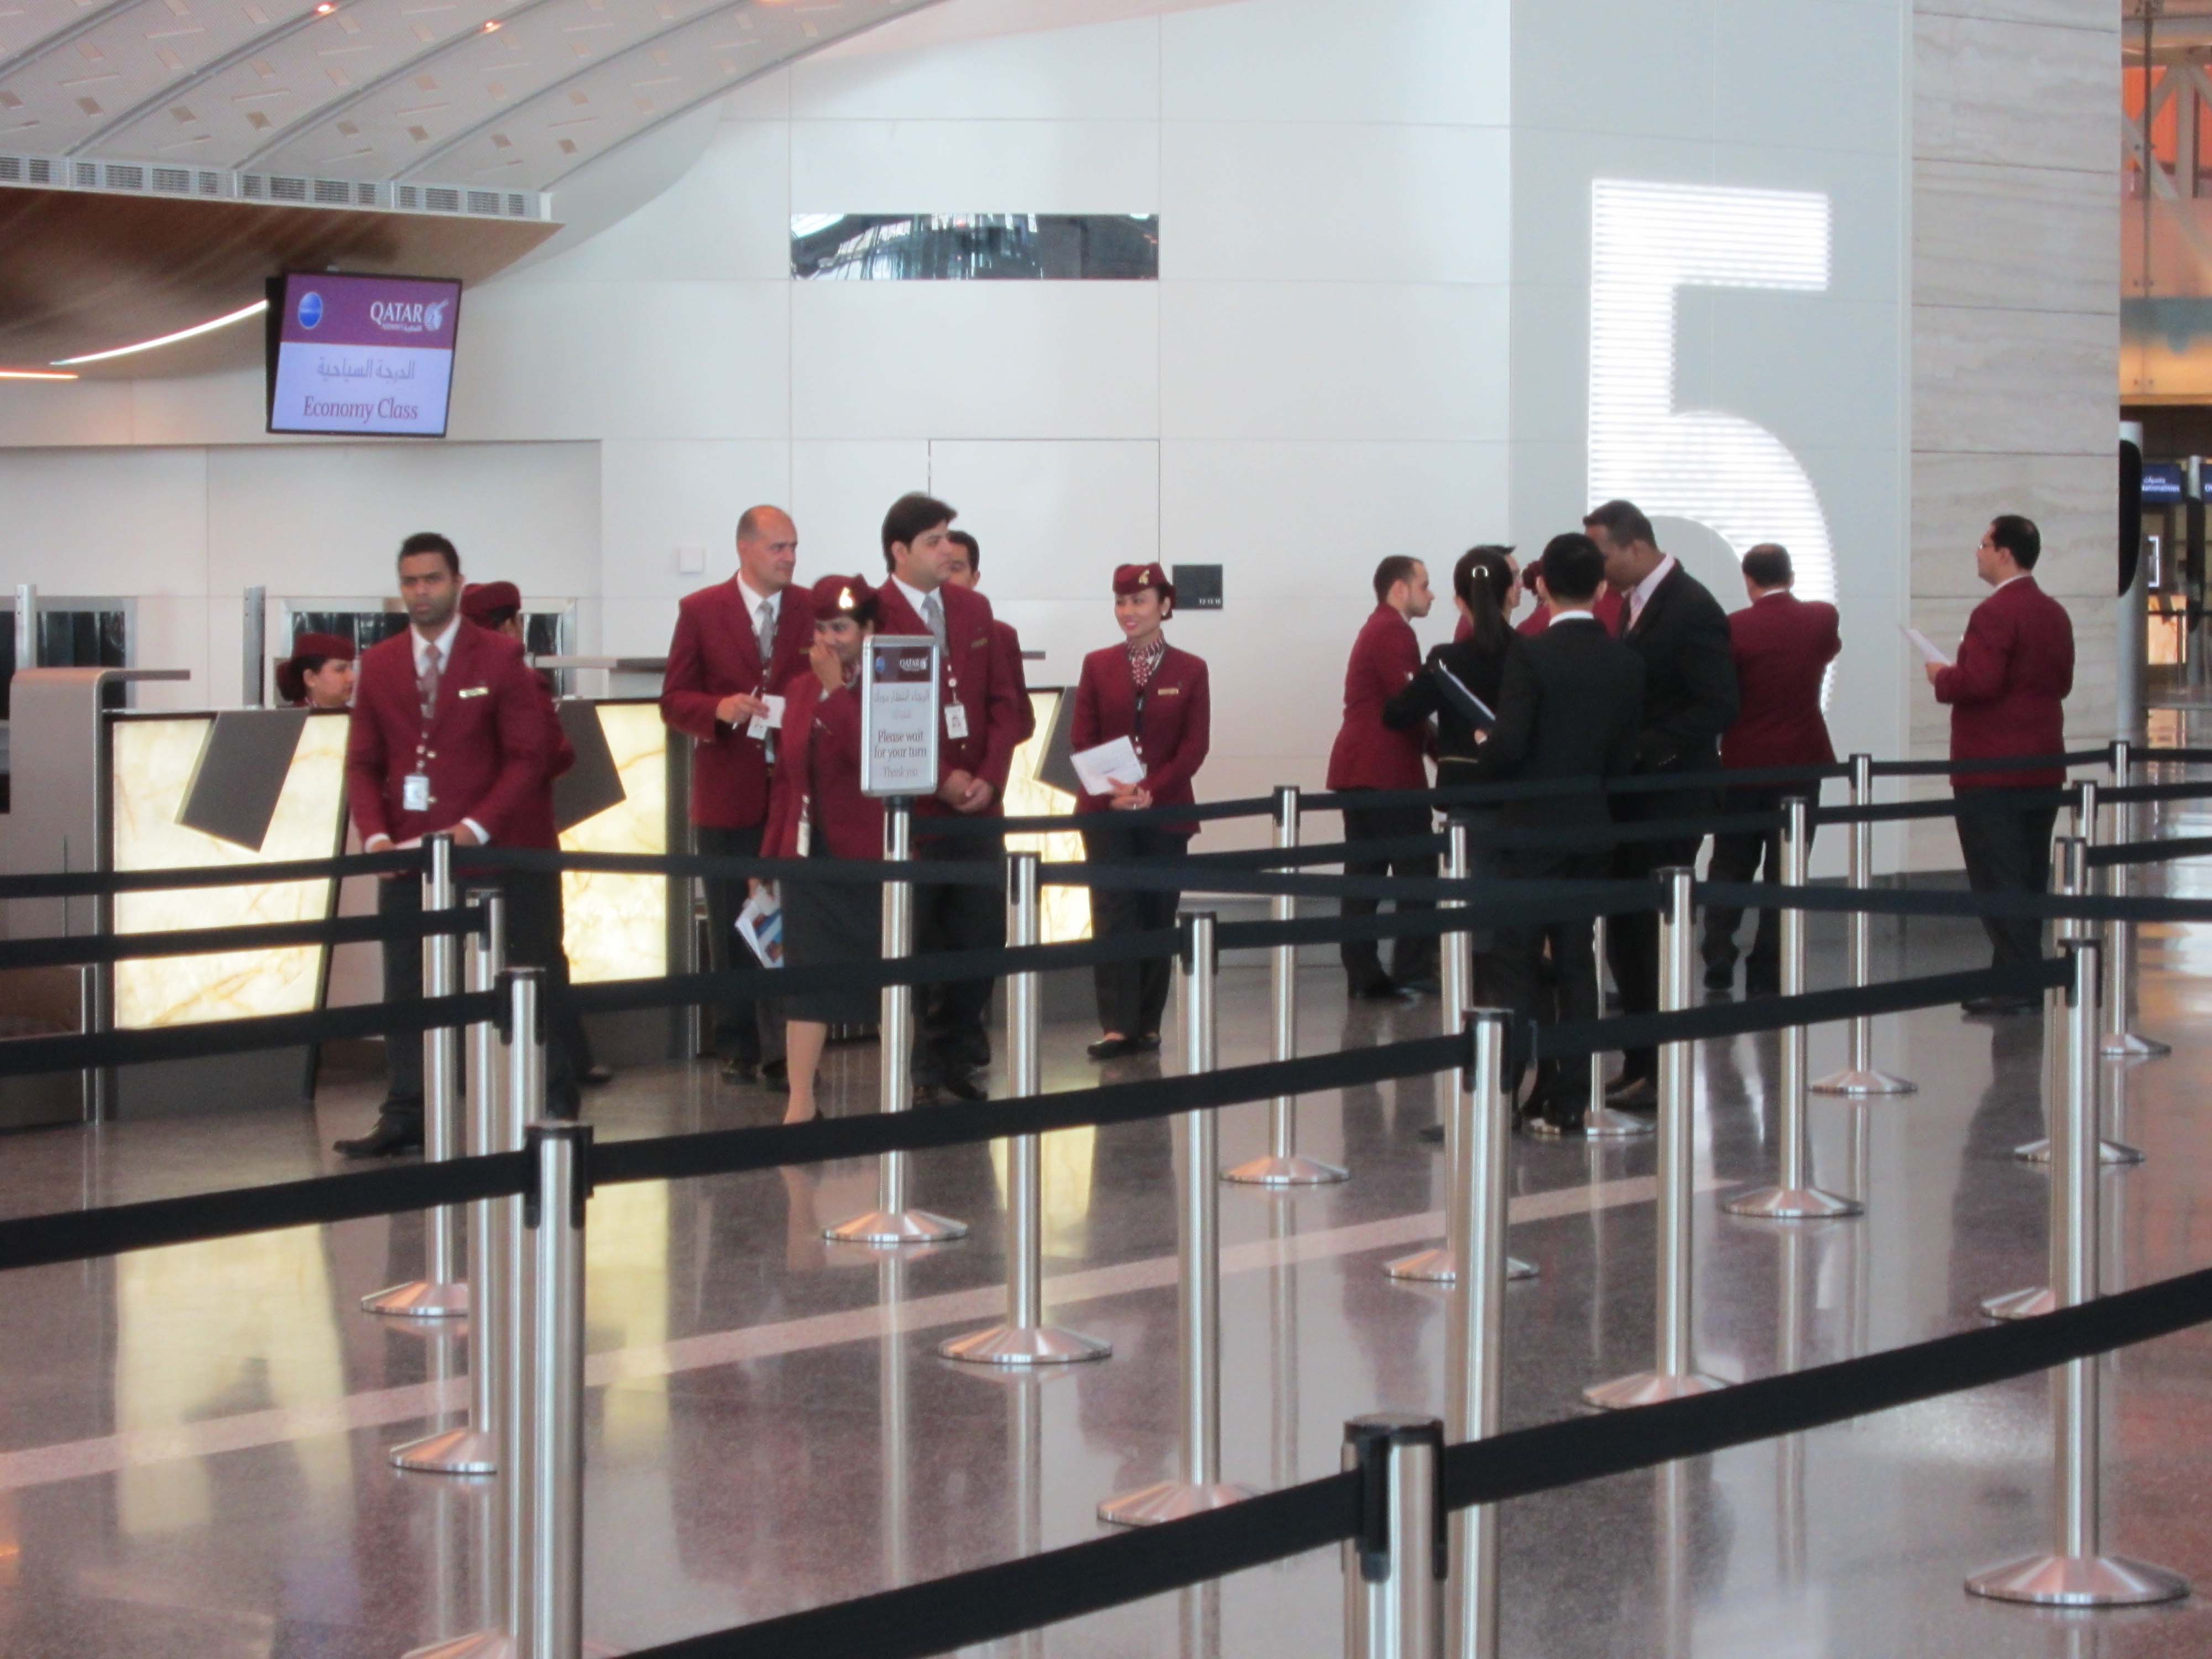 Qatar shifts operations completely to new Hamad